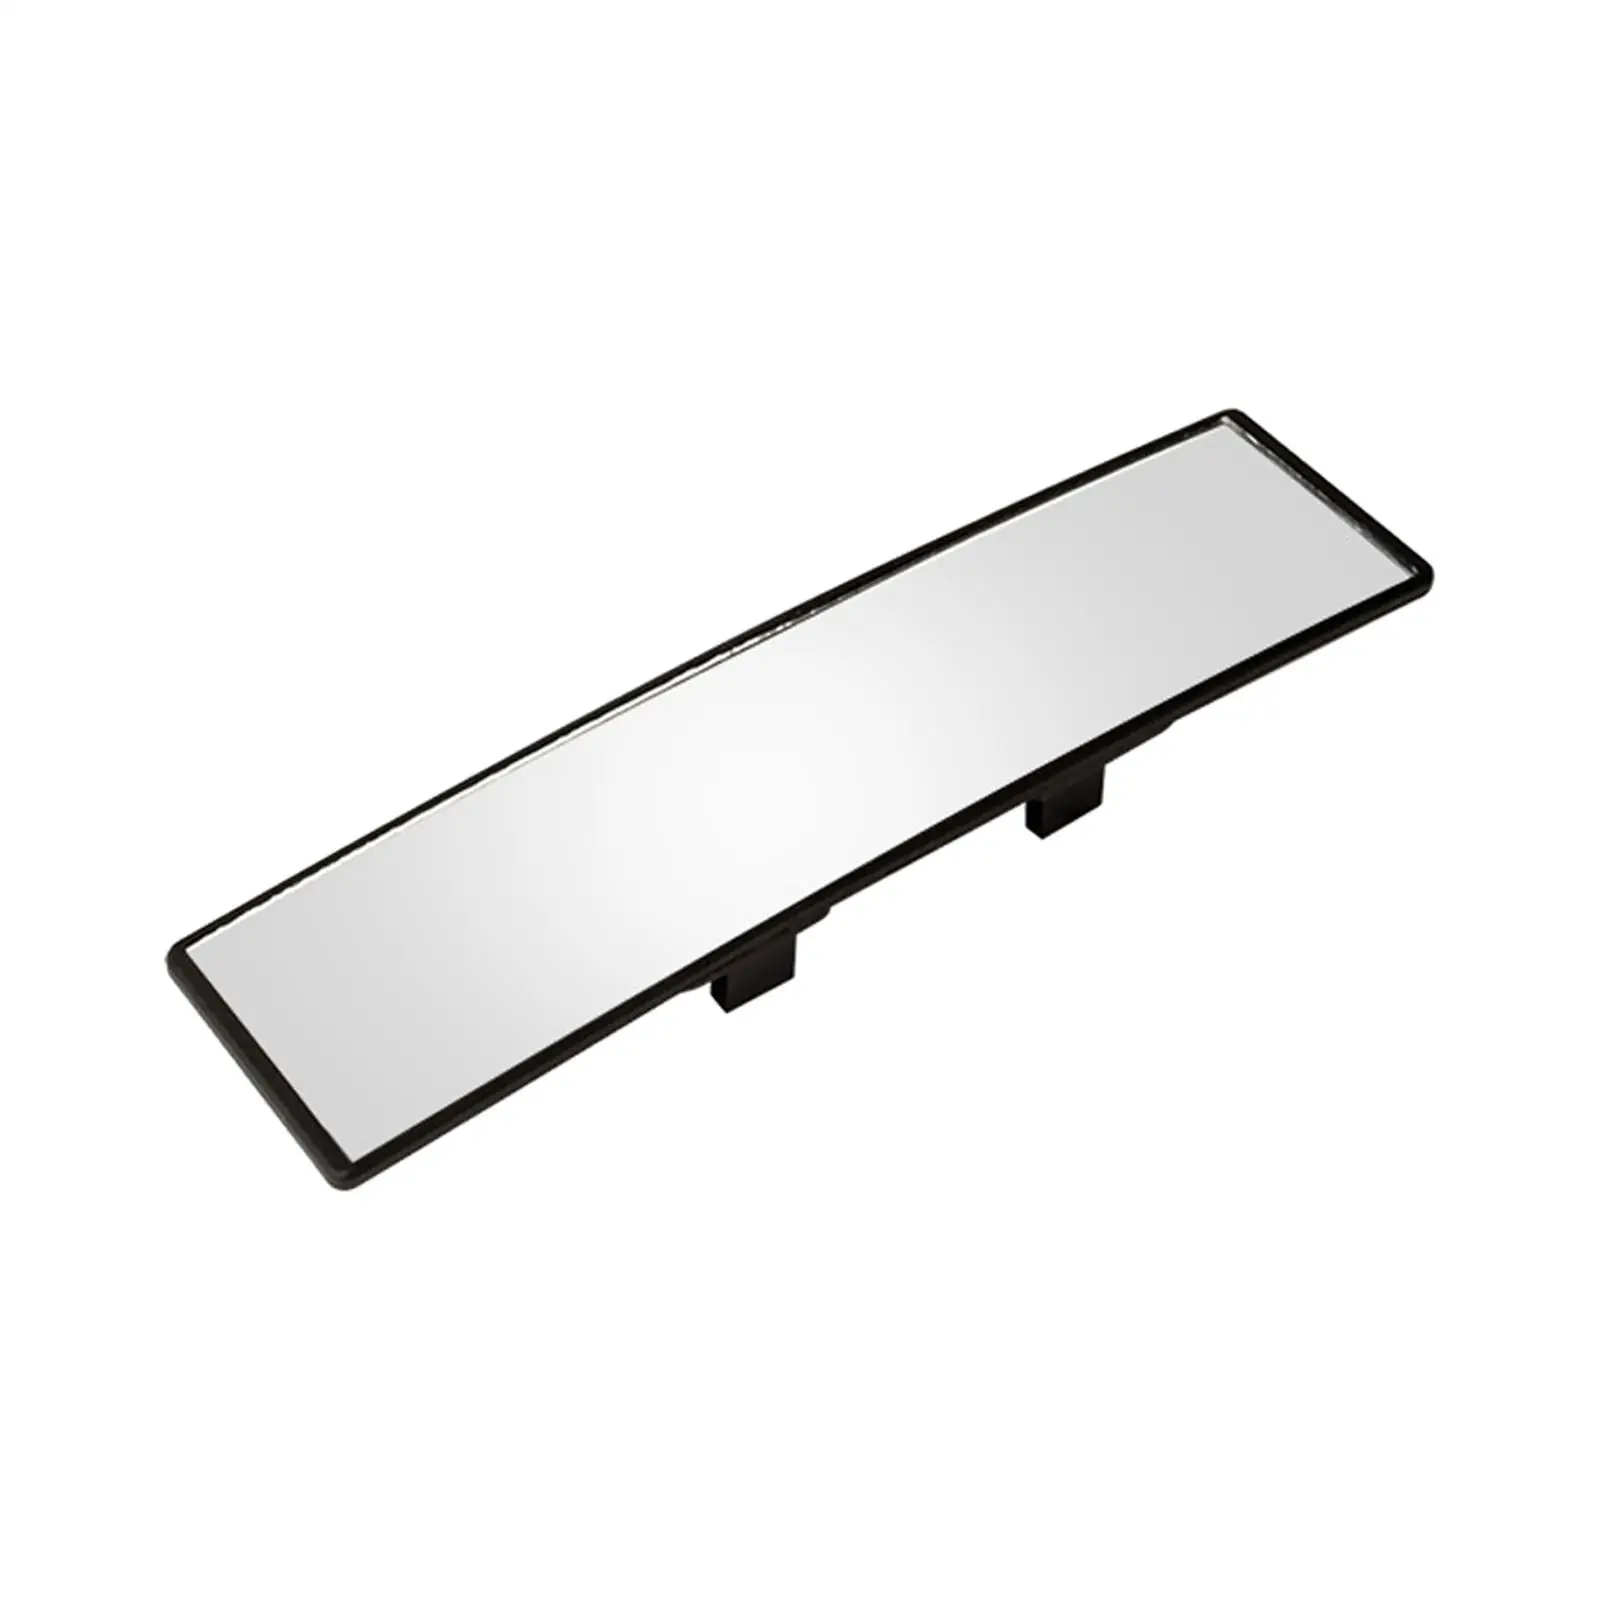 Rear View Mirror Glass Universal Rearview Mirror for Van Car Vehicles